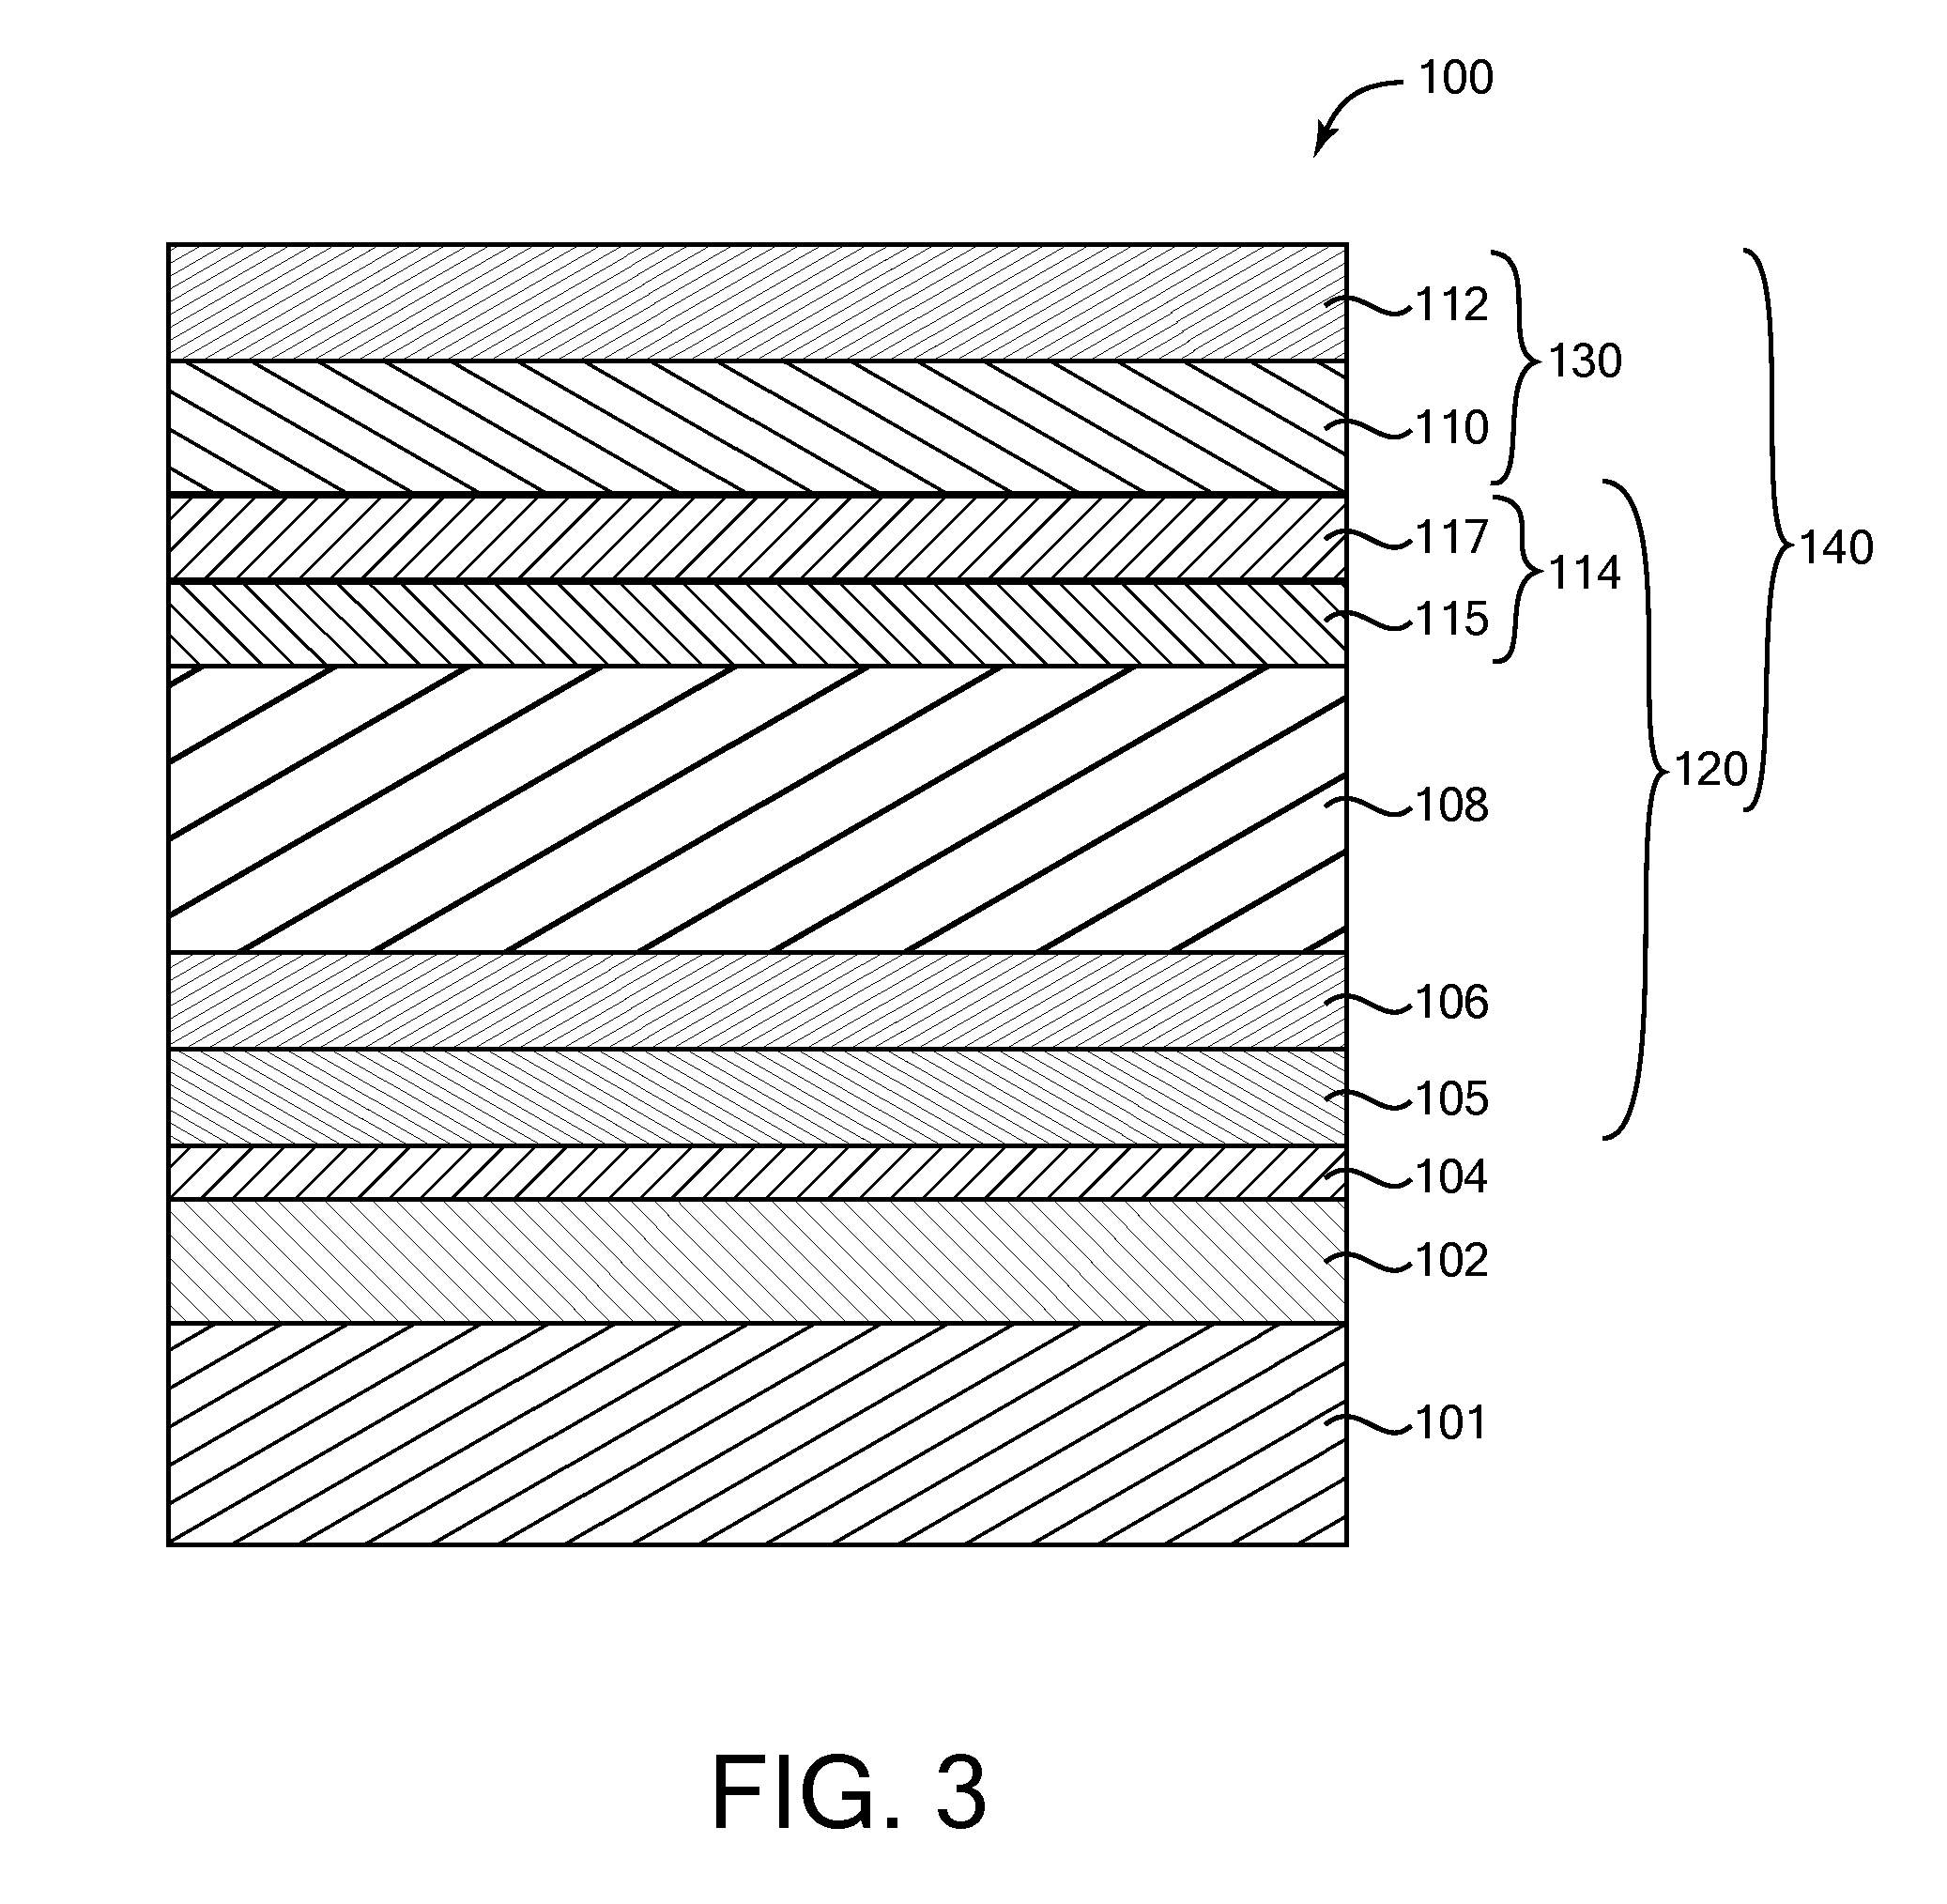 Self-bypass diode function for gallium arsenide photovoltaic devices